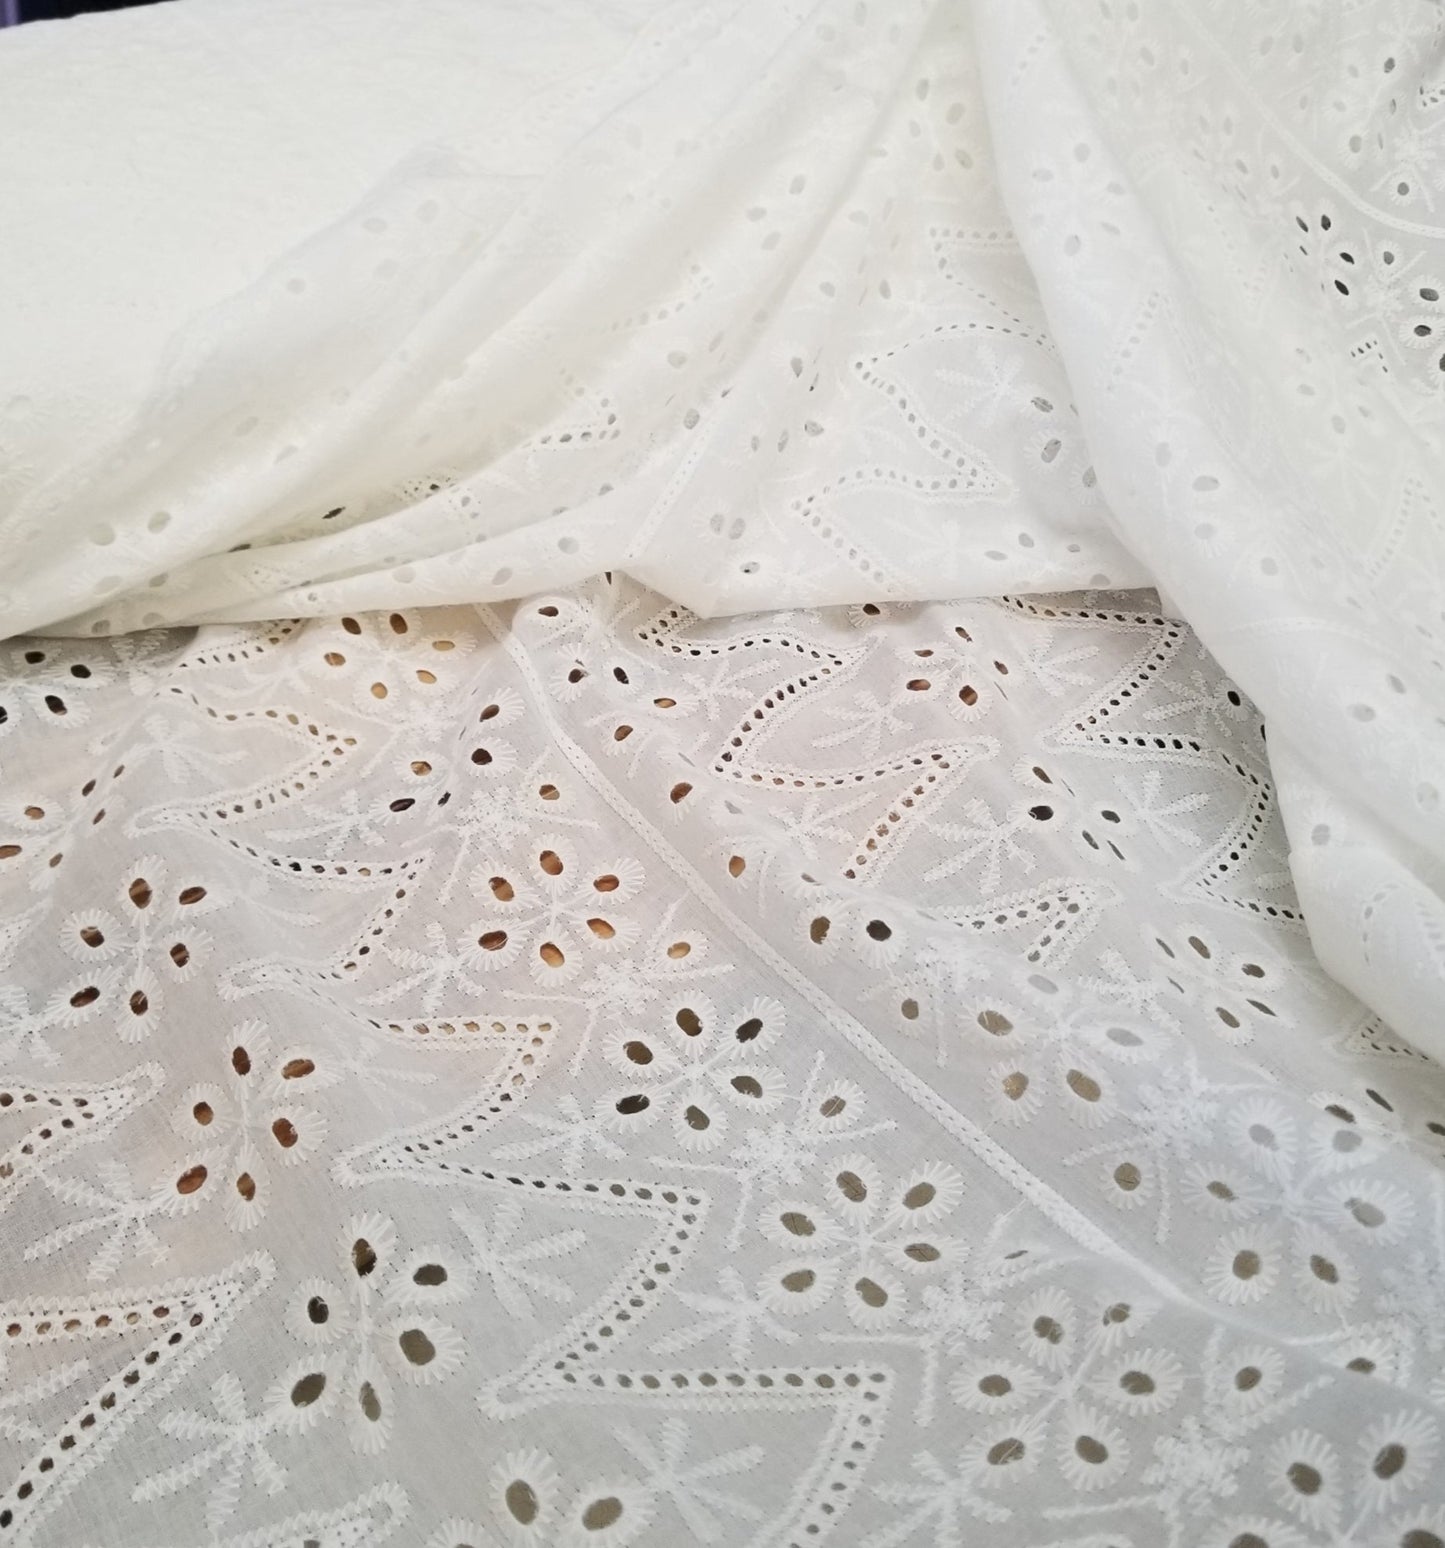 Designer Deadstock Raya Abstract Scalloped  White Eyelet Medium Weight Cotton Sheer Voile Woven- Sold by the yard